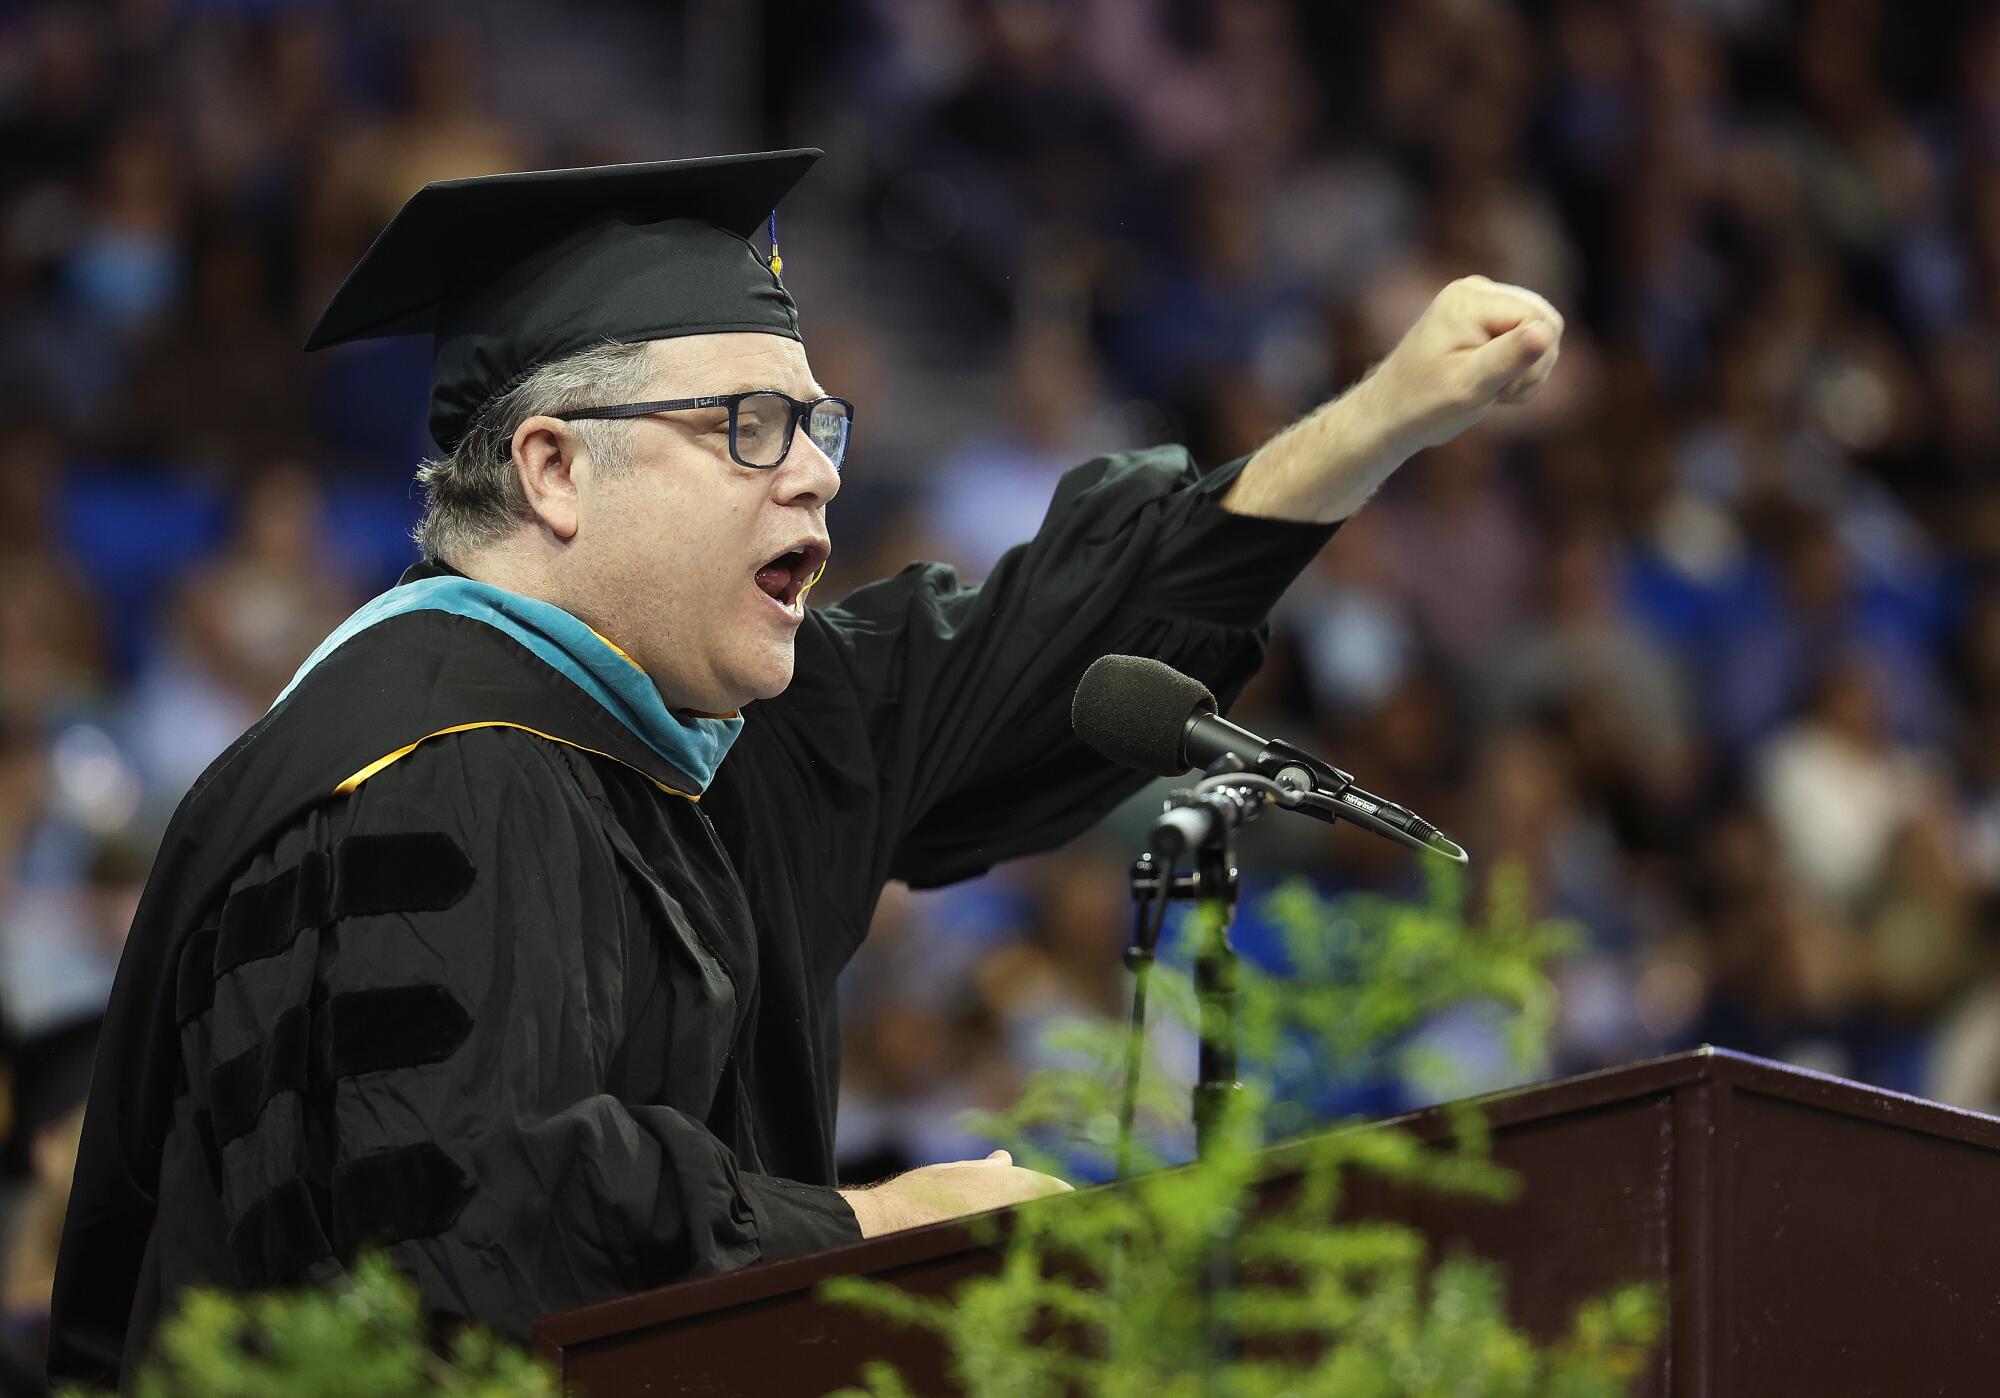 Actor Sean Astin delivers the keynote speech at UCLA's Pauley Pavilion.